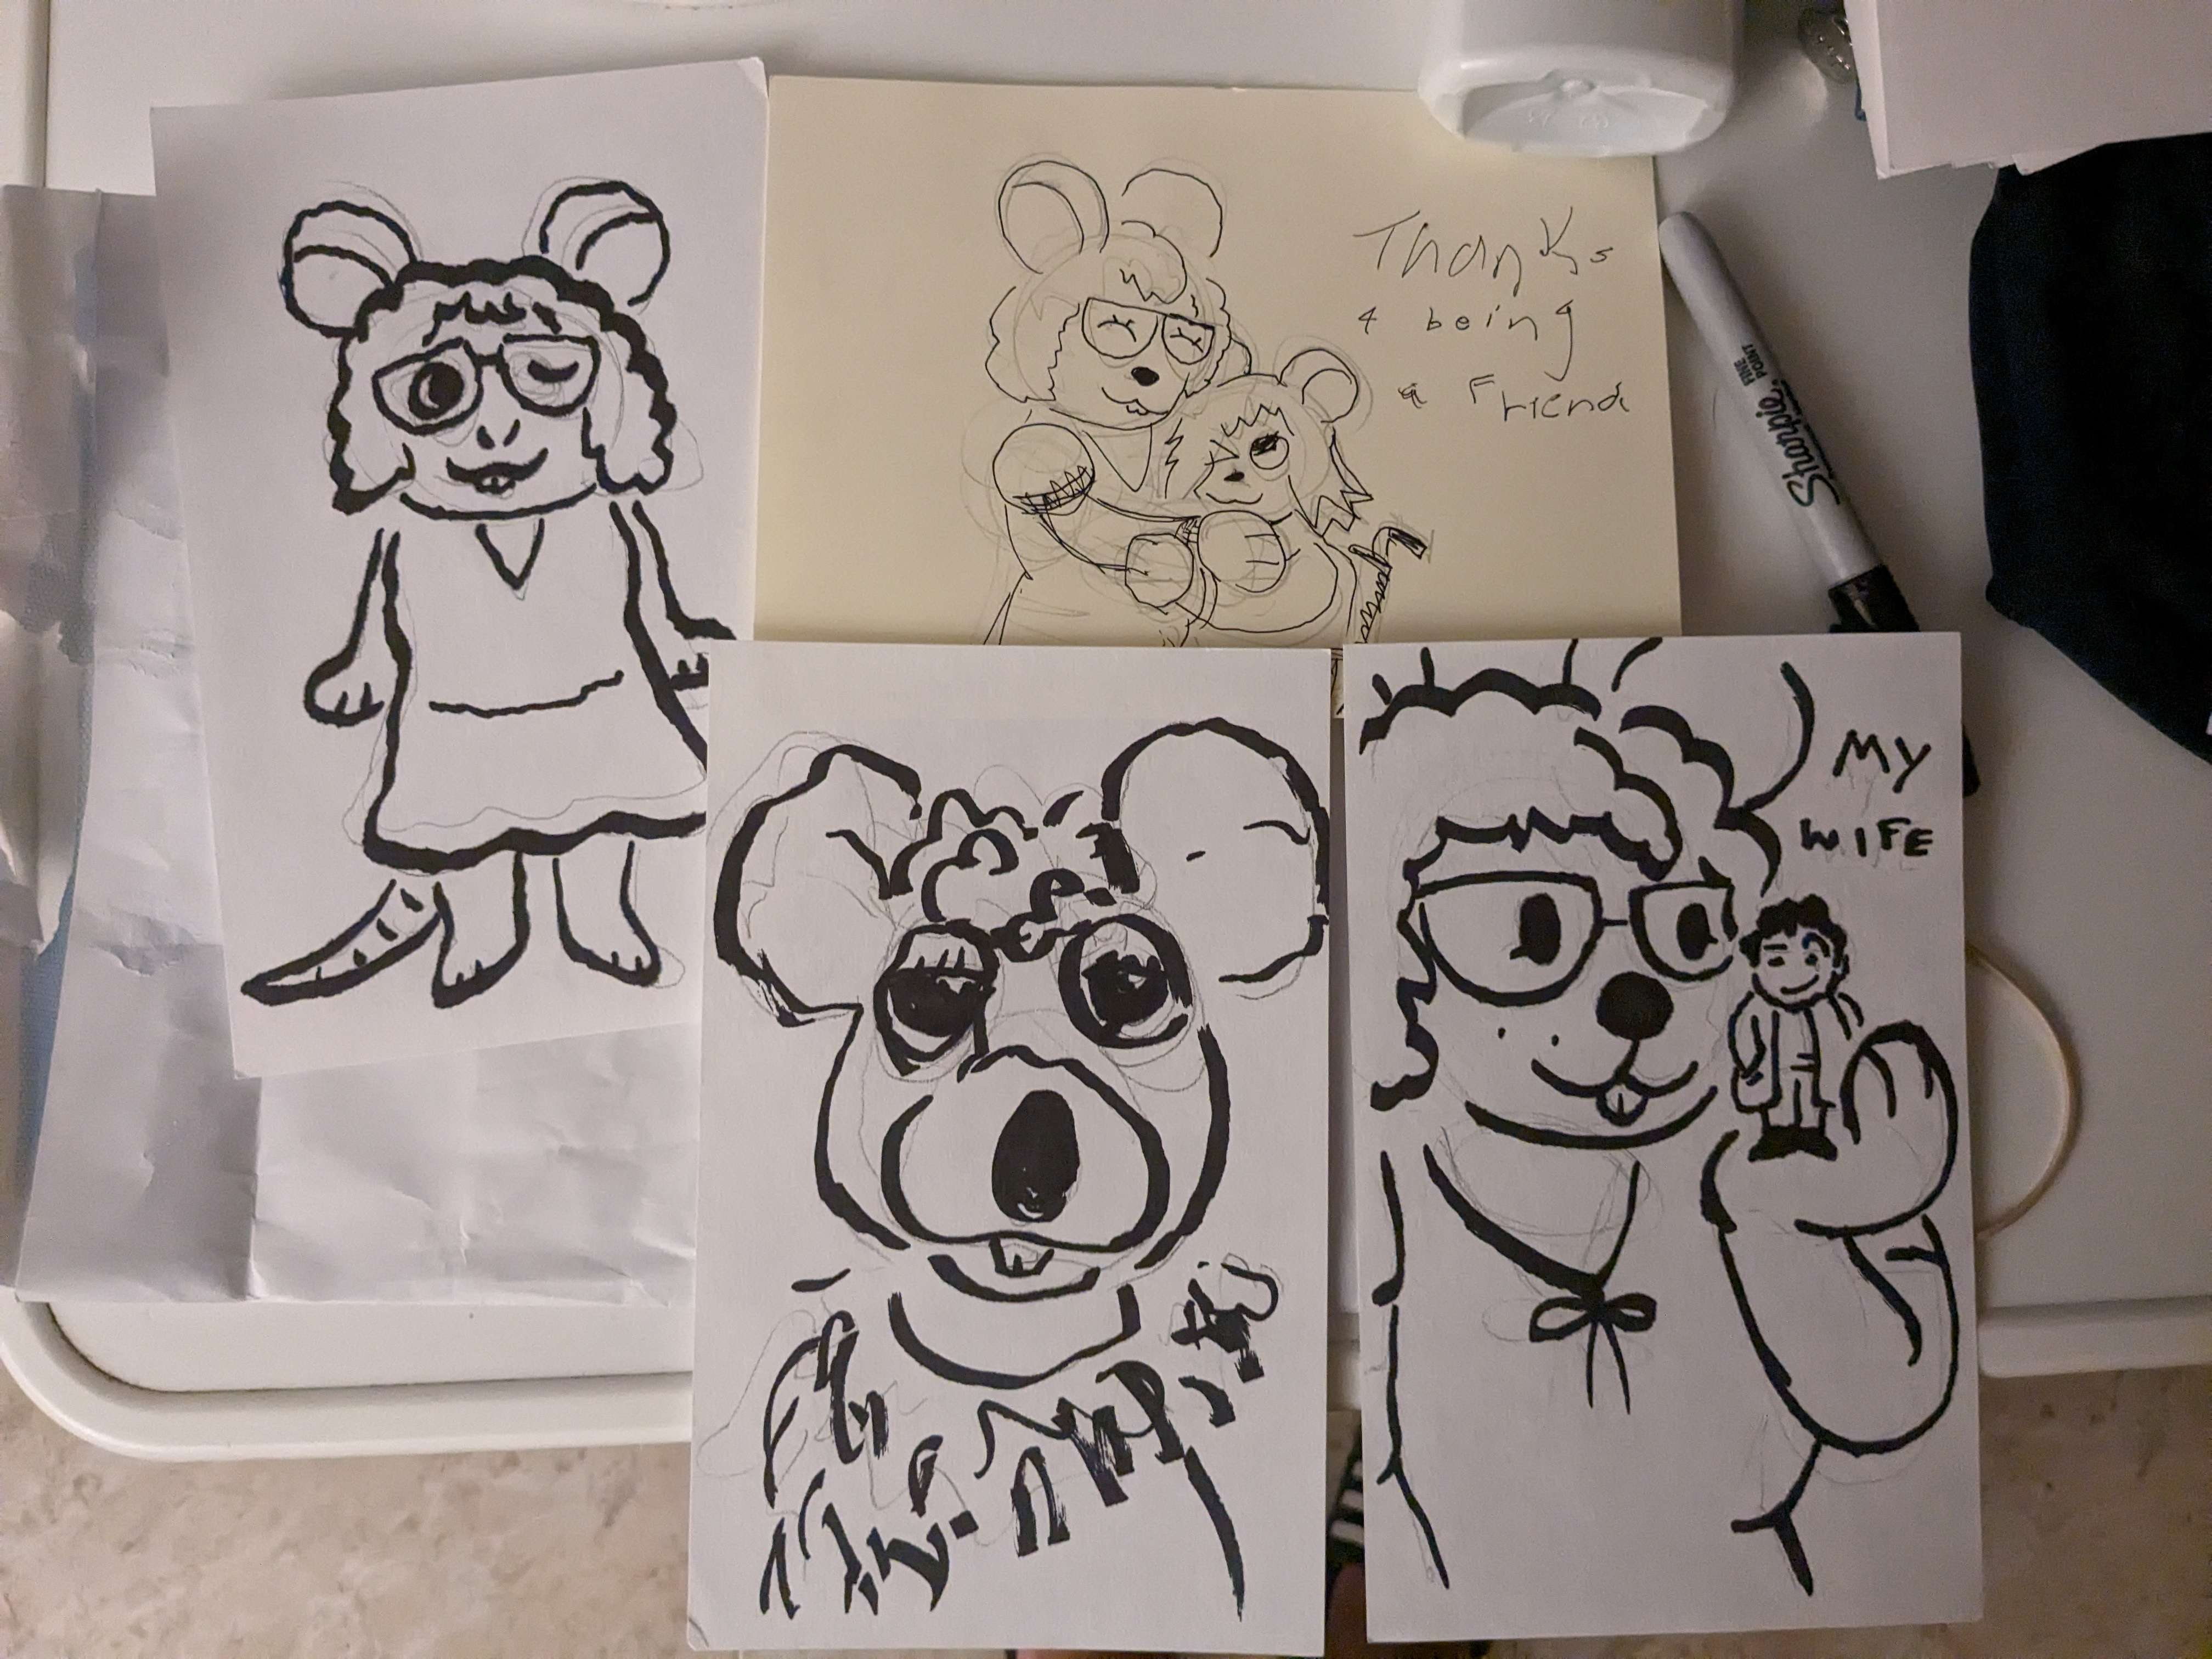 four drawings on a table. one is of katie as a little mouse wearing a dress with curly hair. another is of katie the mouse hugging marie the mouse, a smaller mouse with straight short hair in a wheelchair. text reads 'thanks 4 being a friend'. another drawing is of katie the mouse holding a small columbo from the tv series columbo. he is a small man in a trenchcoat. text has him saying 'my wife'. the final drawing is of a rodent-like puppet decorated with ruffles around her collar.